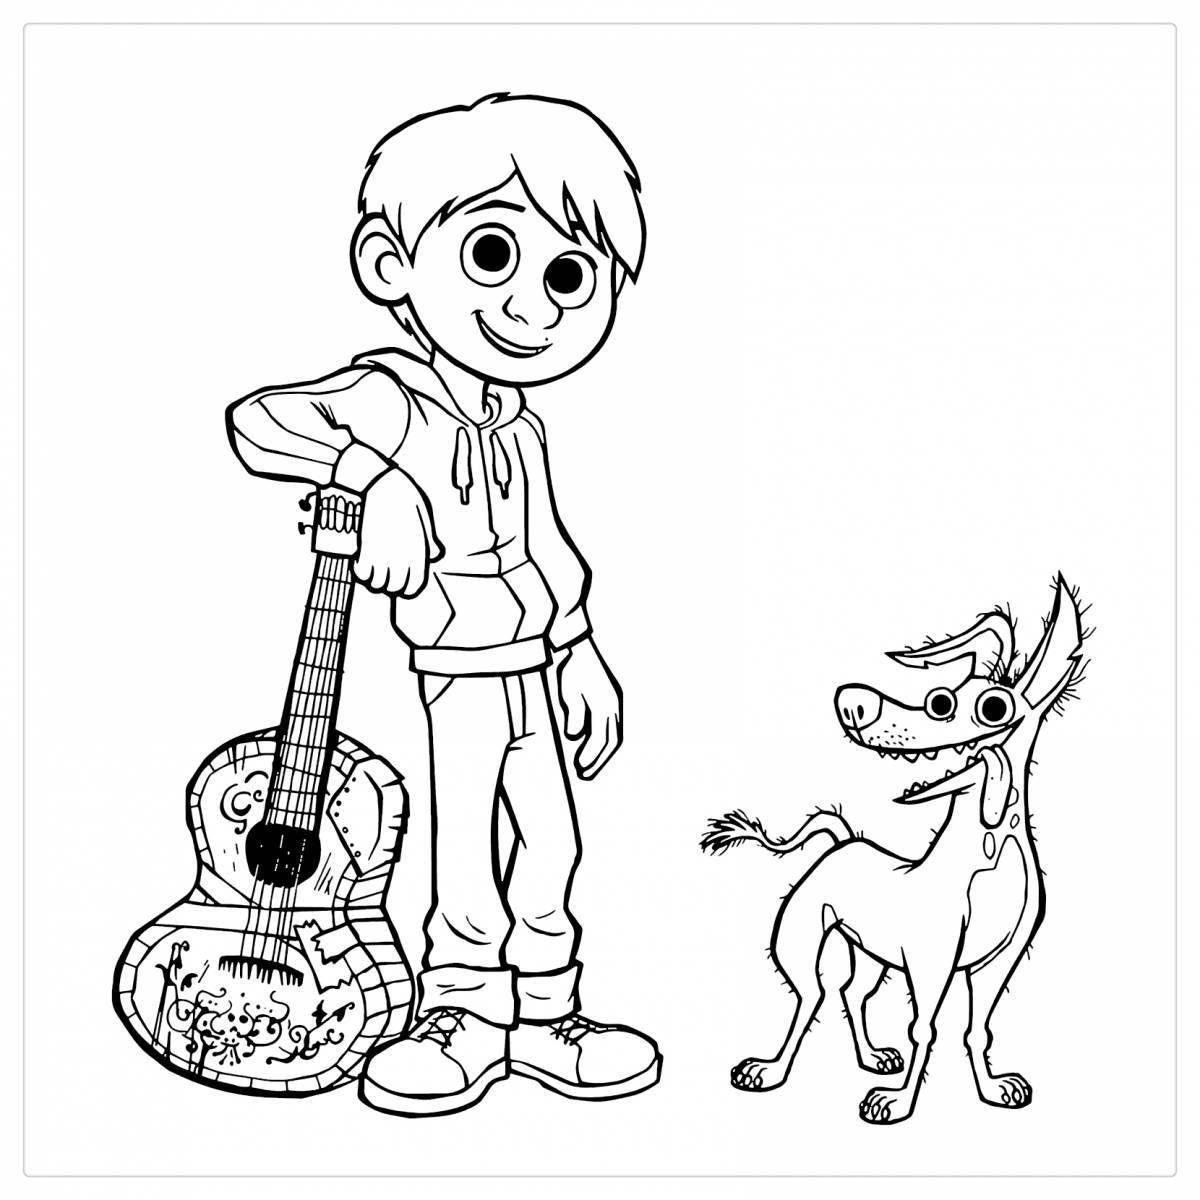 Wonderful coco coloring page